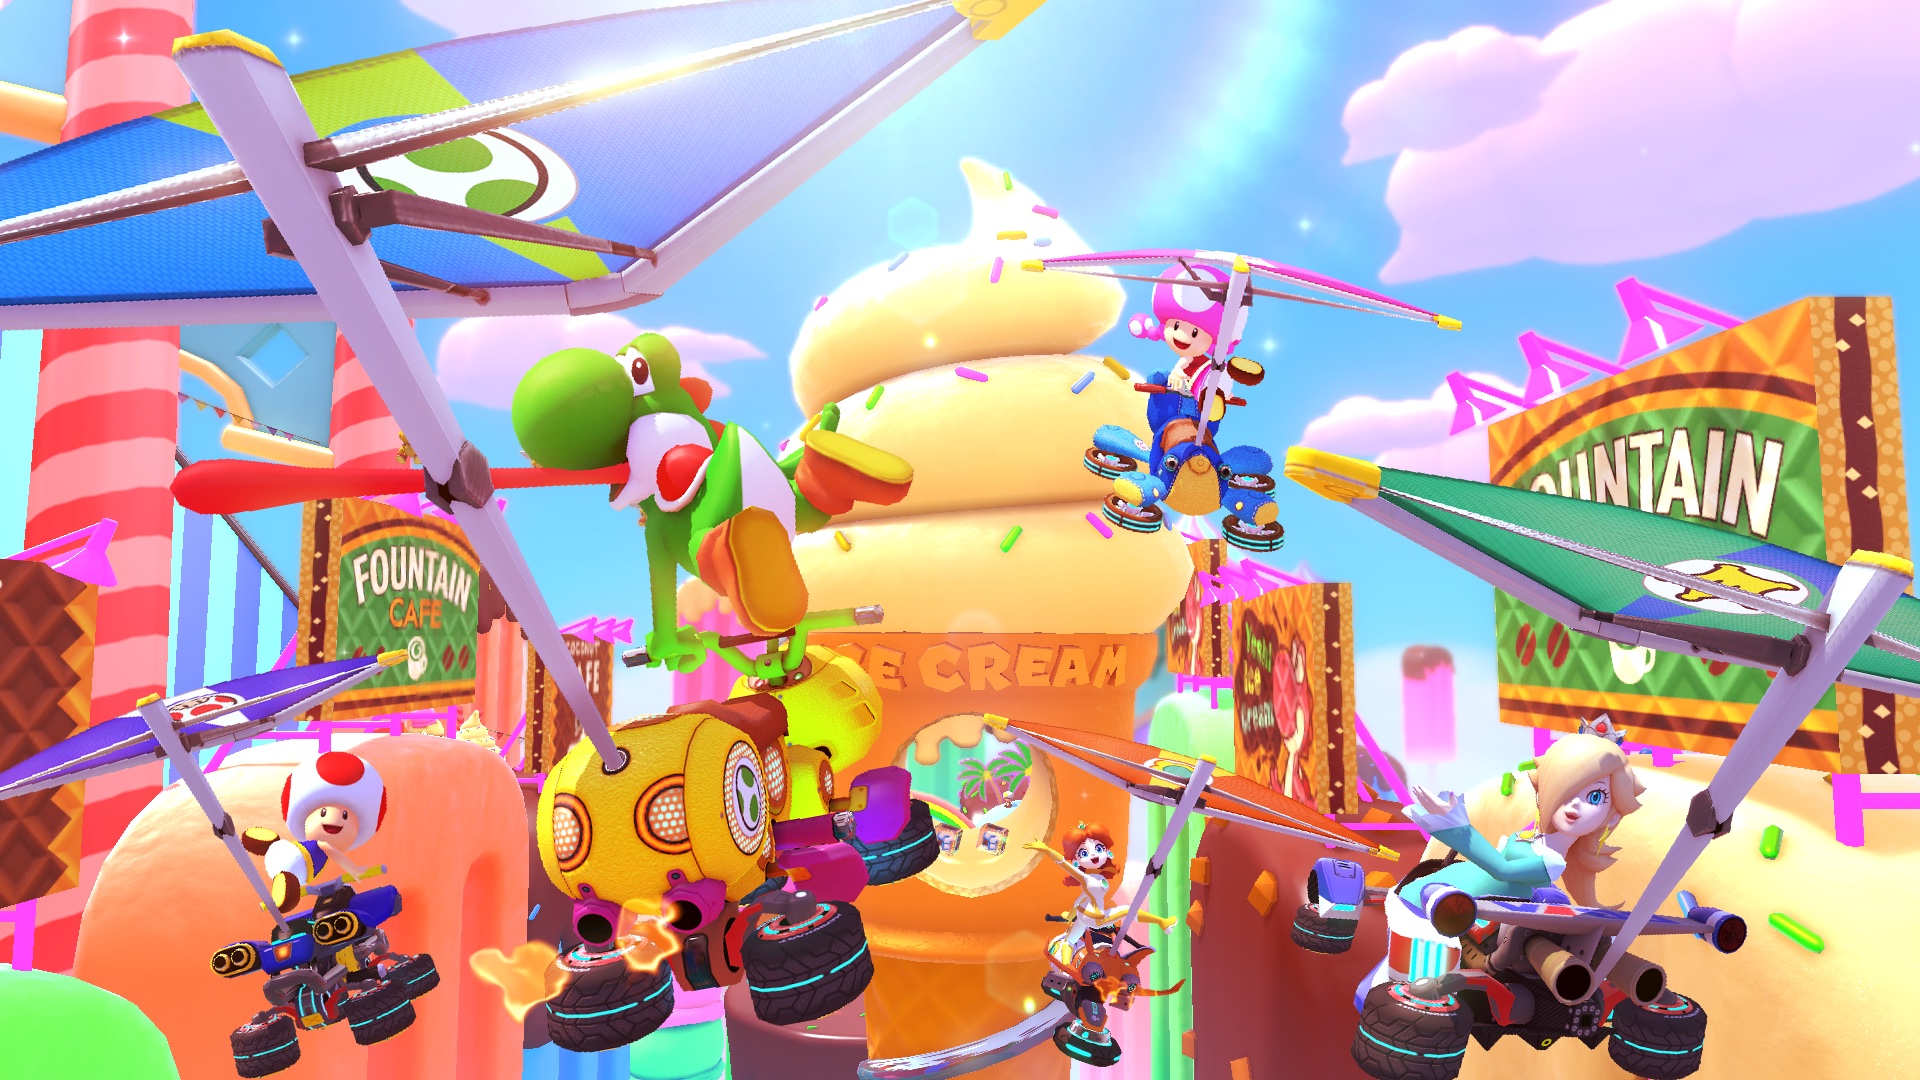 Toad, Yoshi, Toadette, Daisy, and Rosalina glide through the new Sky-High Sundae course in Mario Kart 8 Deluxe